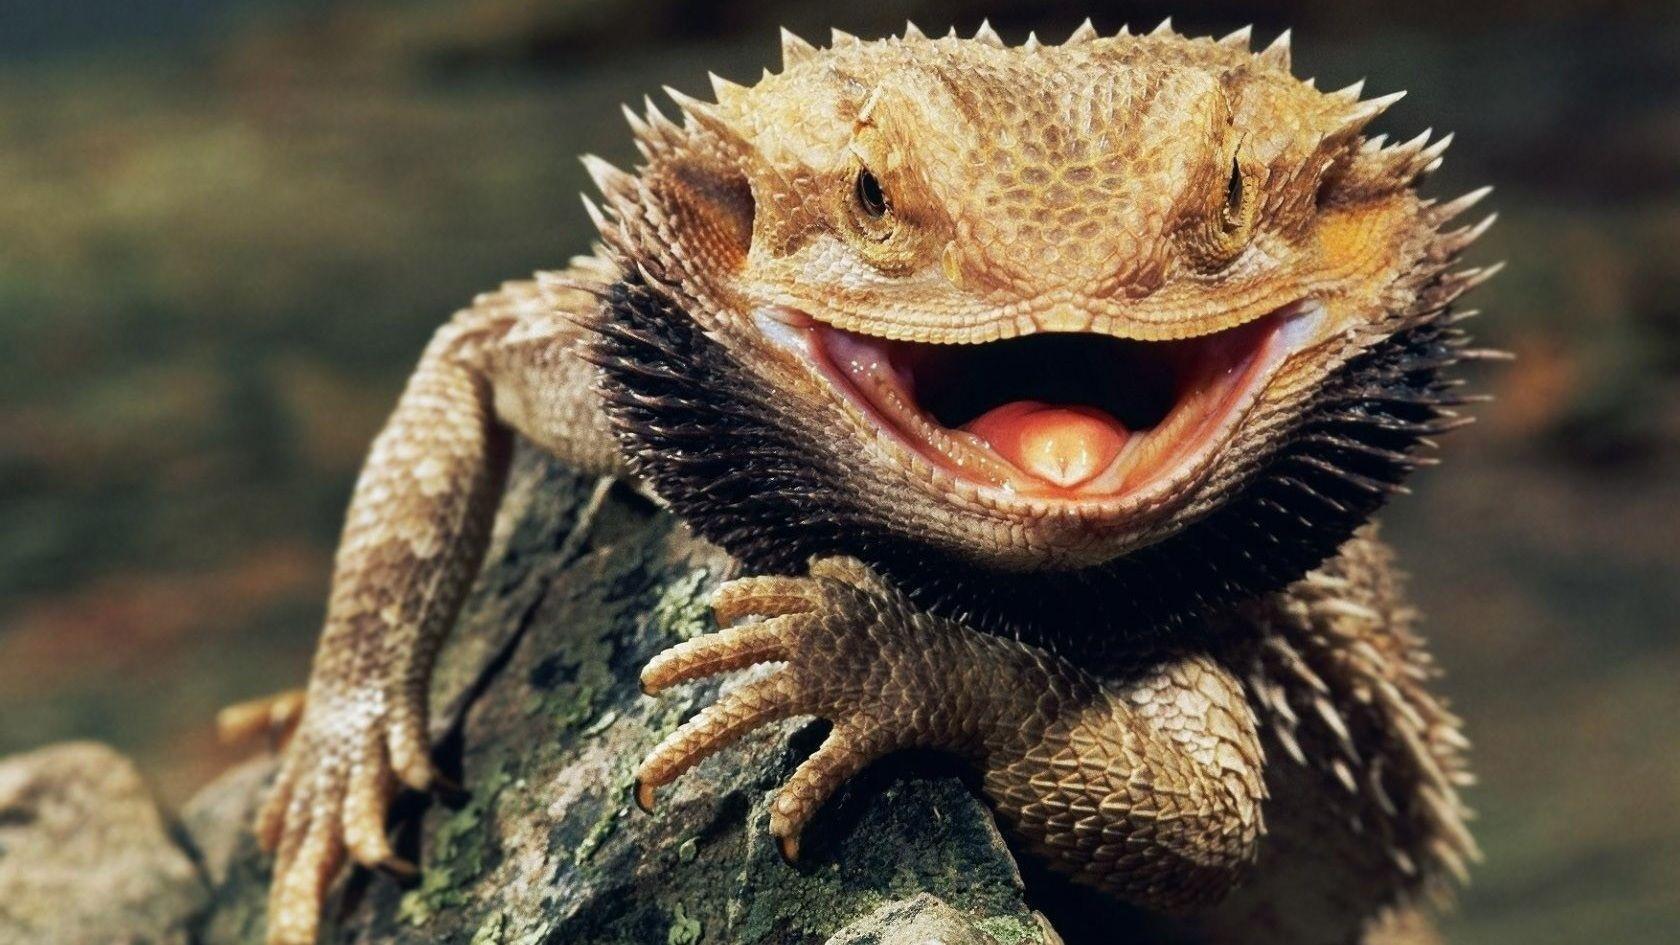 Bearded Dragon Wallpapers - Wallpaper Cave